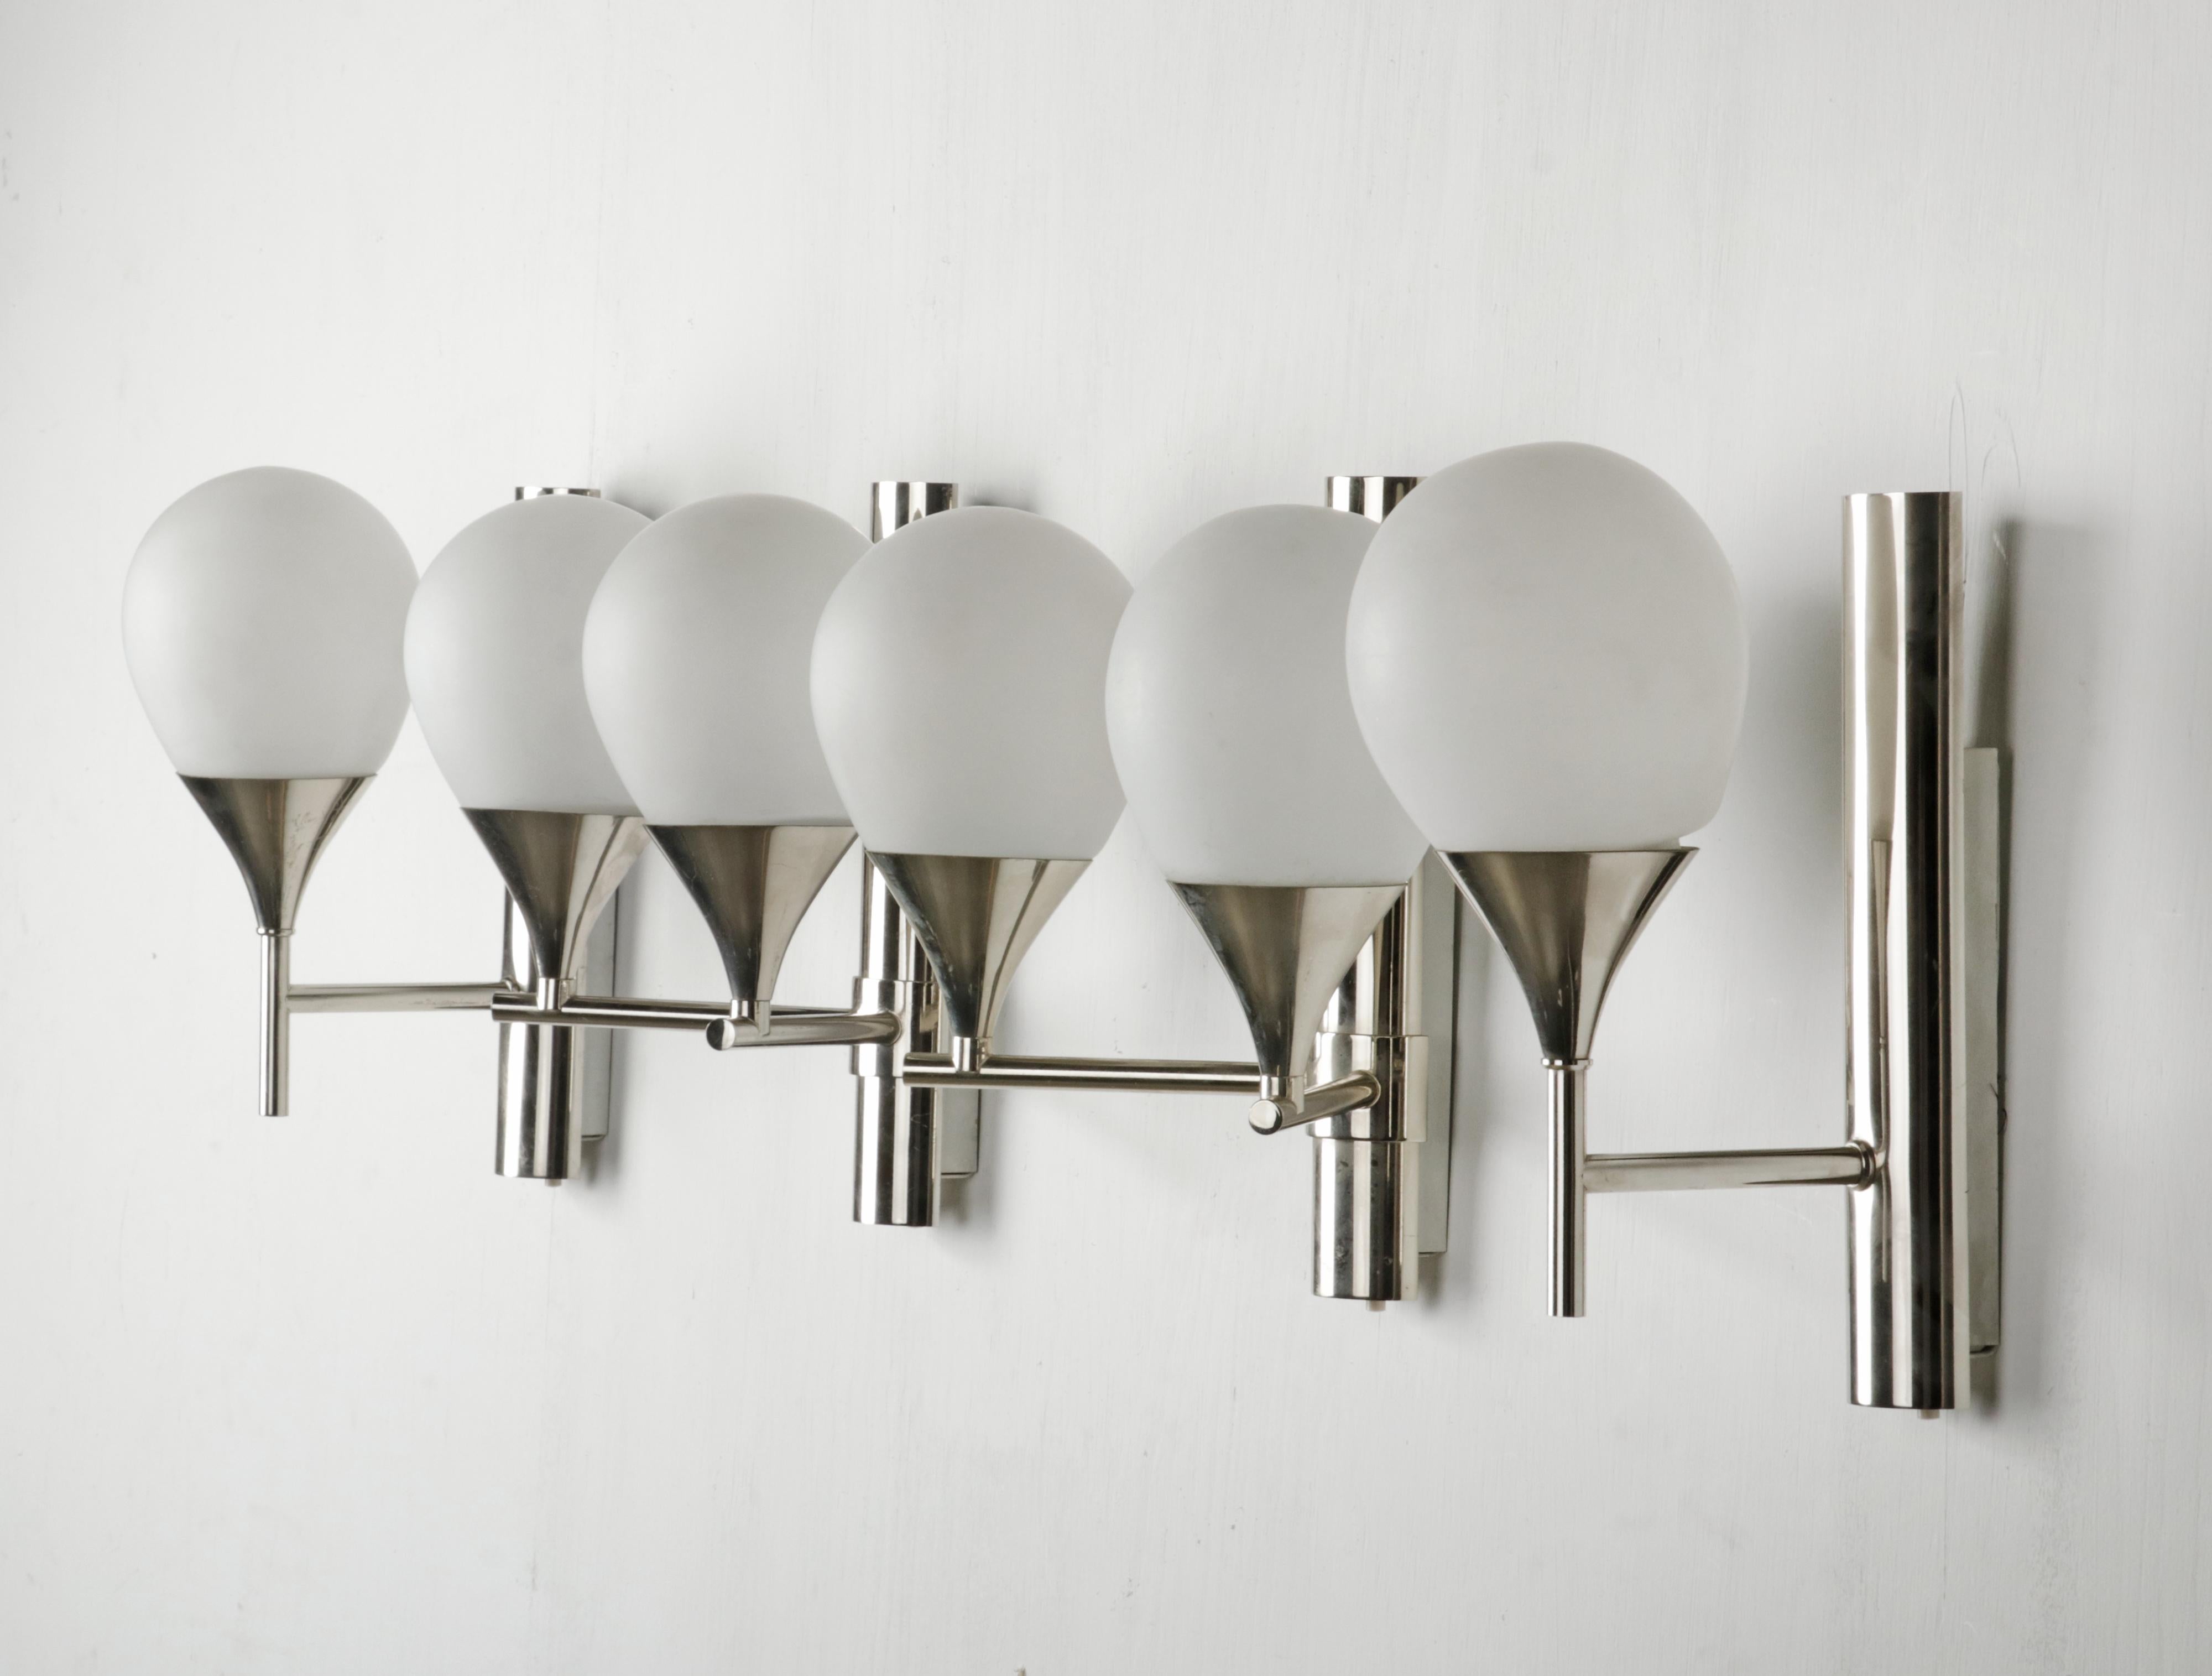 Mid-20th Century Set of Four Mid-Century Modern Chrome Plated Sconces / Wall Lights For Sale